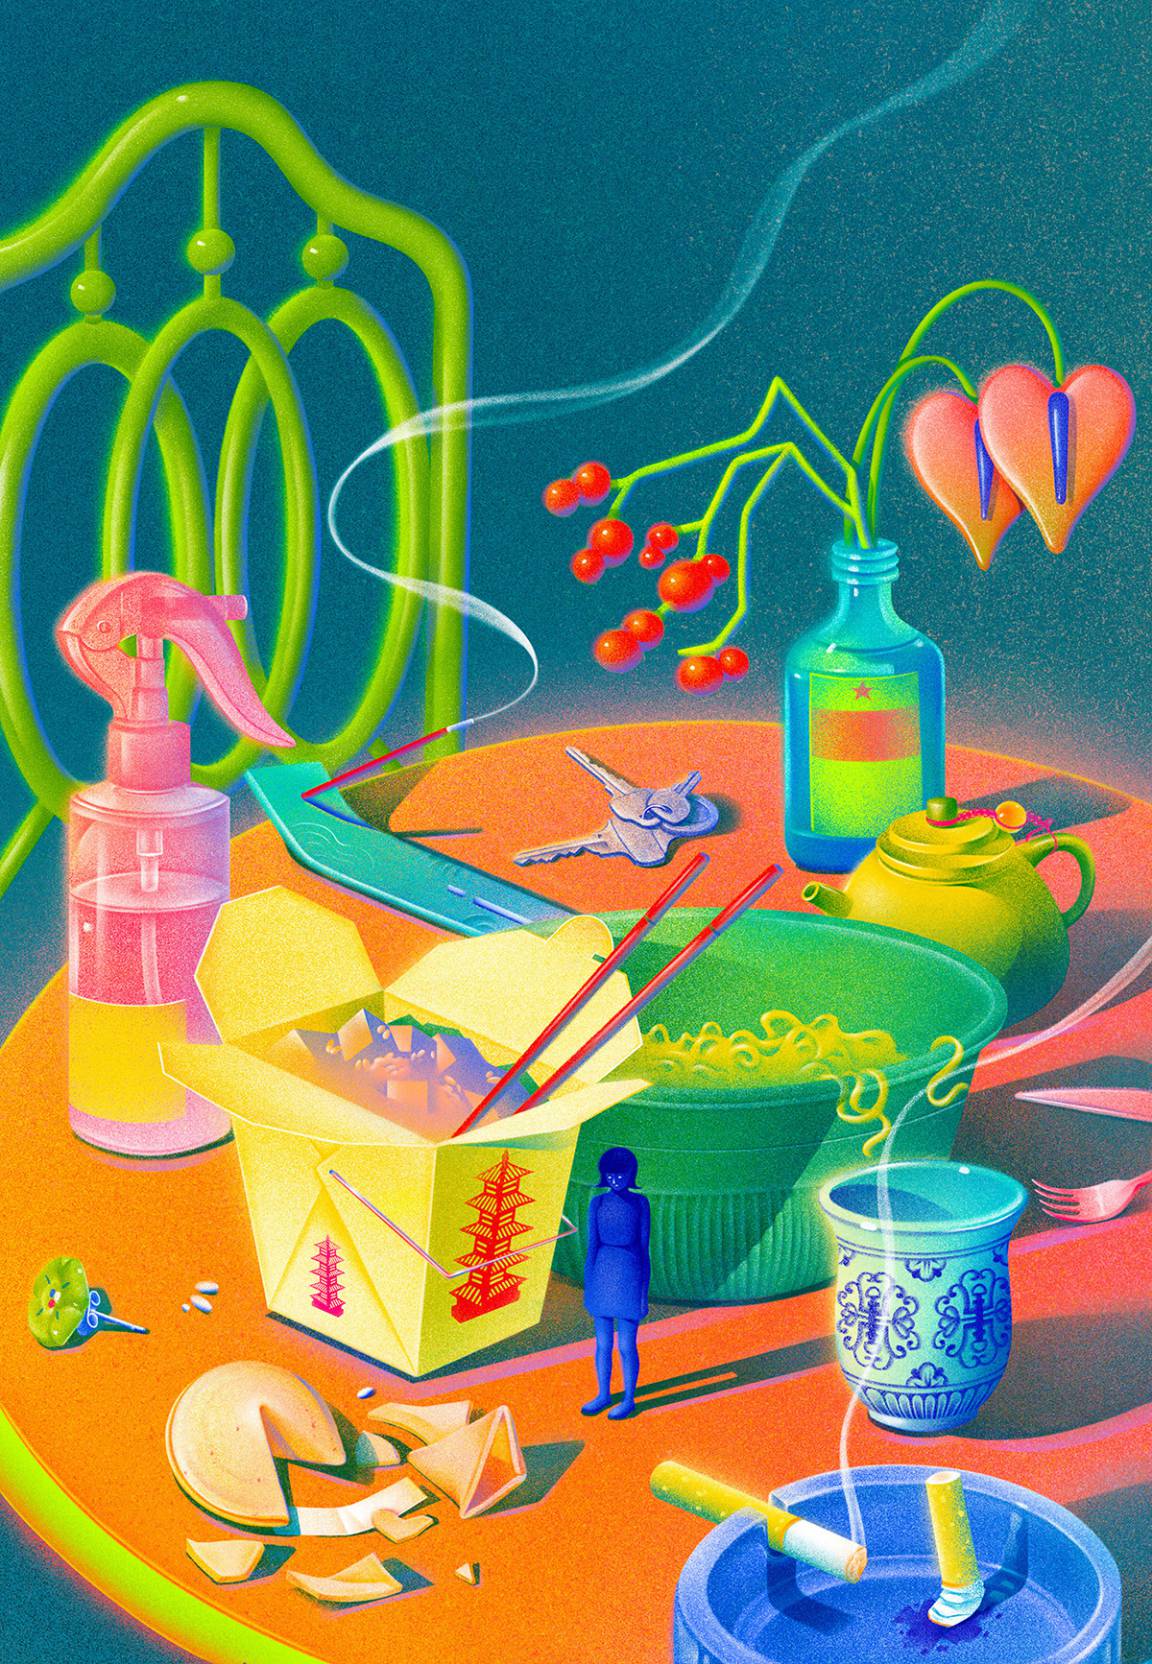 Intricate And Vibrant Surreal Illustrations By Wenjing Yang (6)